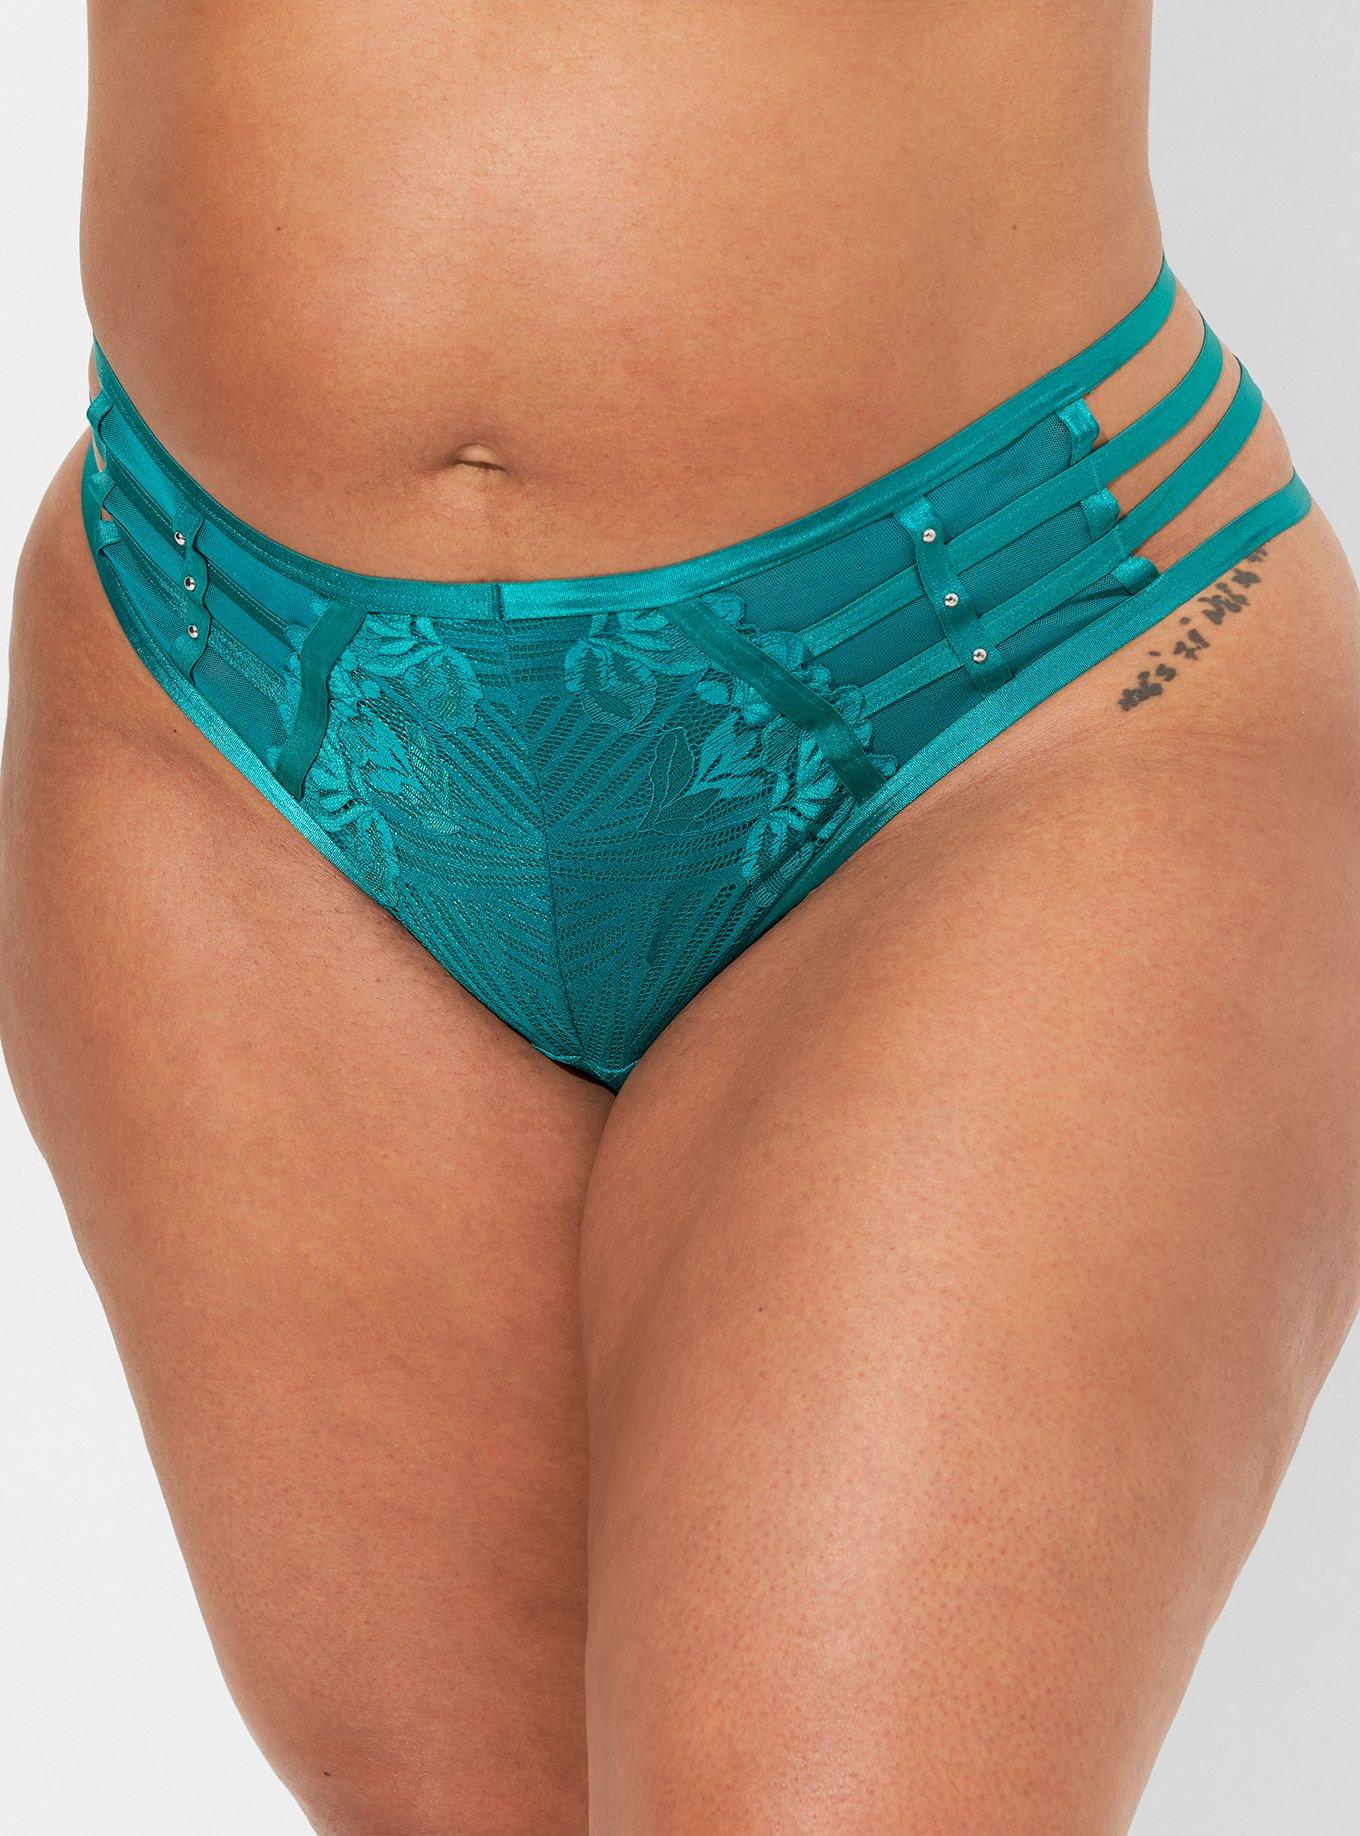 Plus Size - Studs And Lace Thong Panty - Torrid